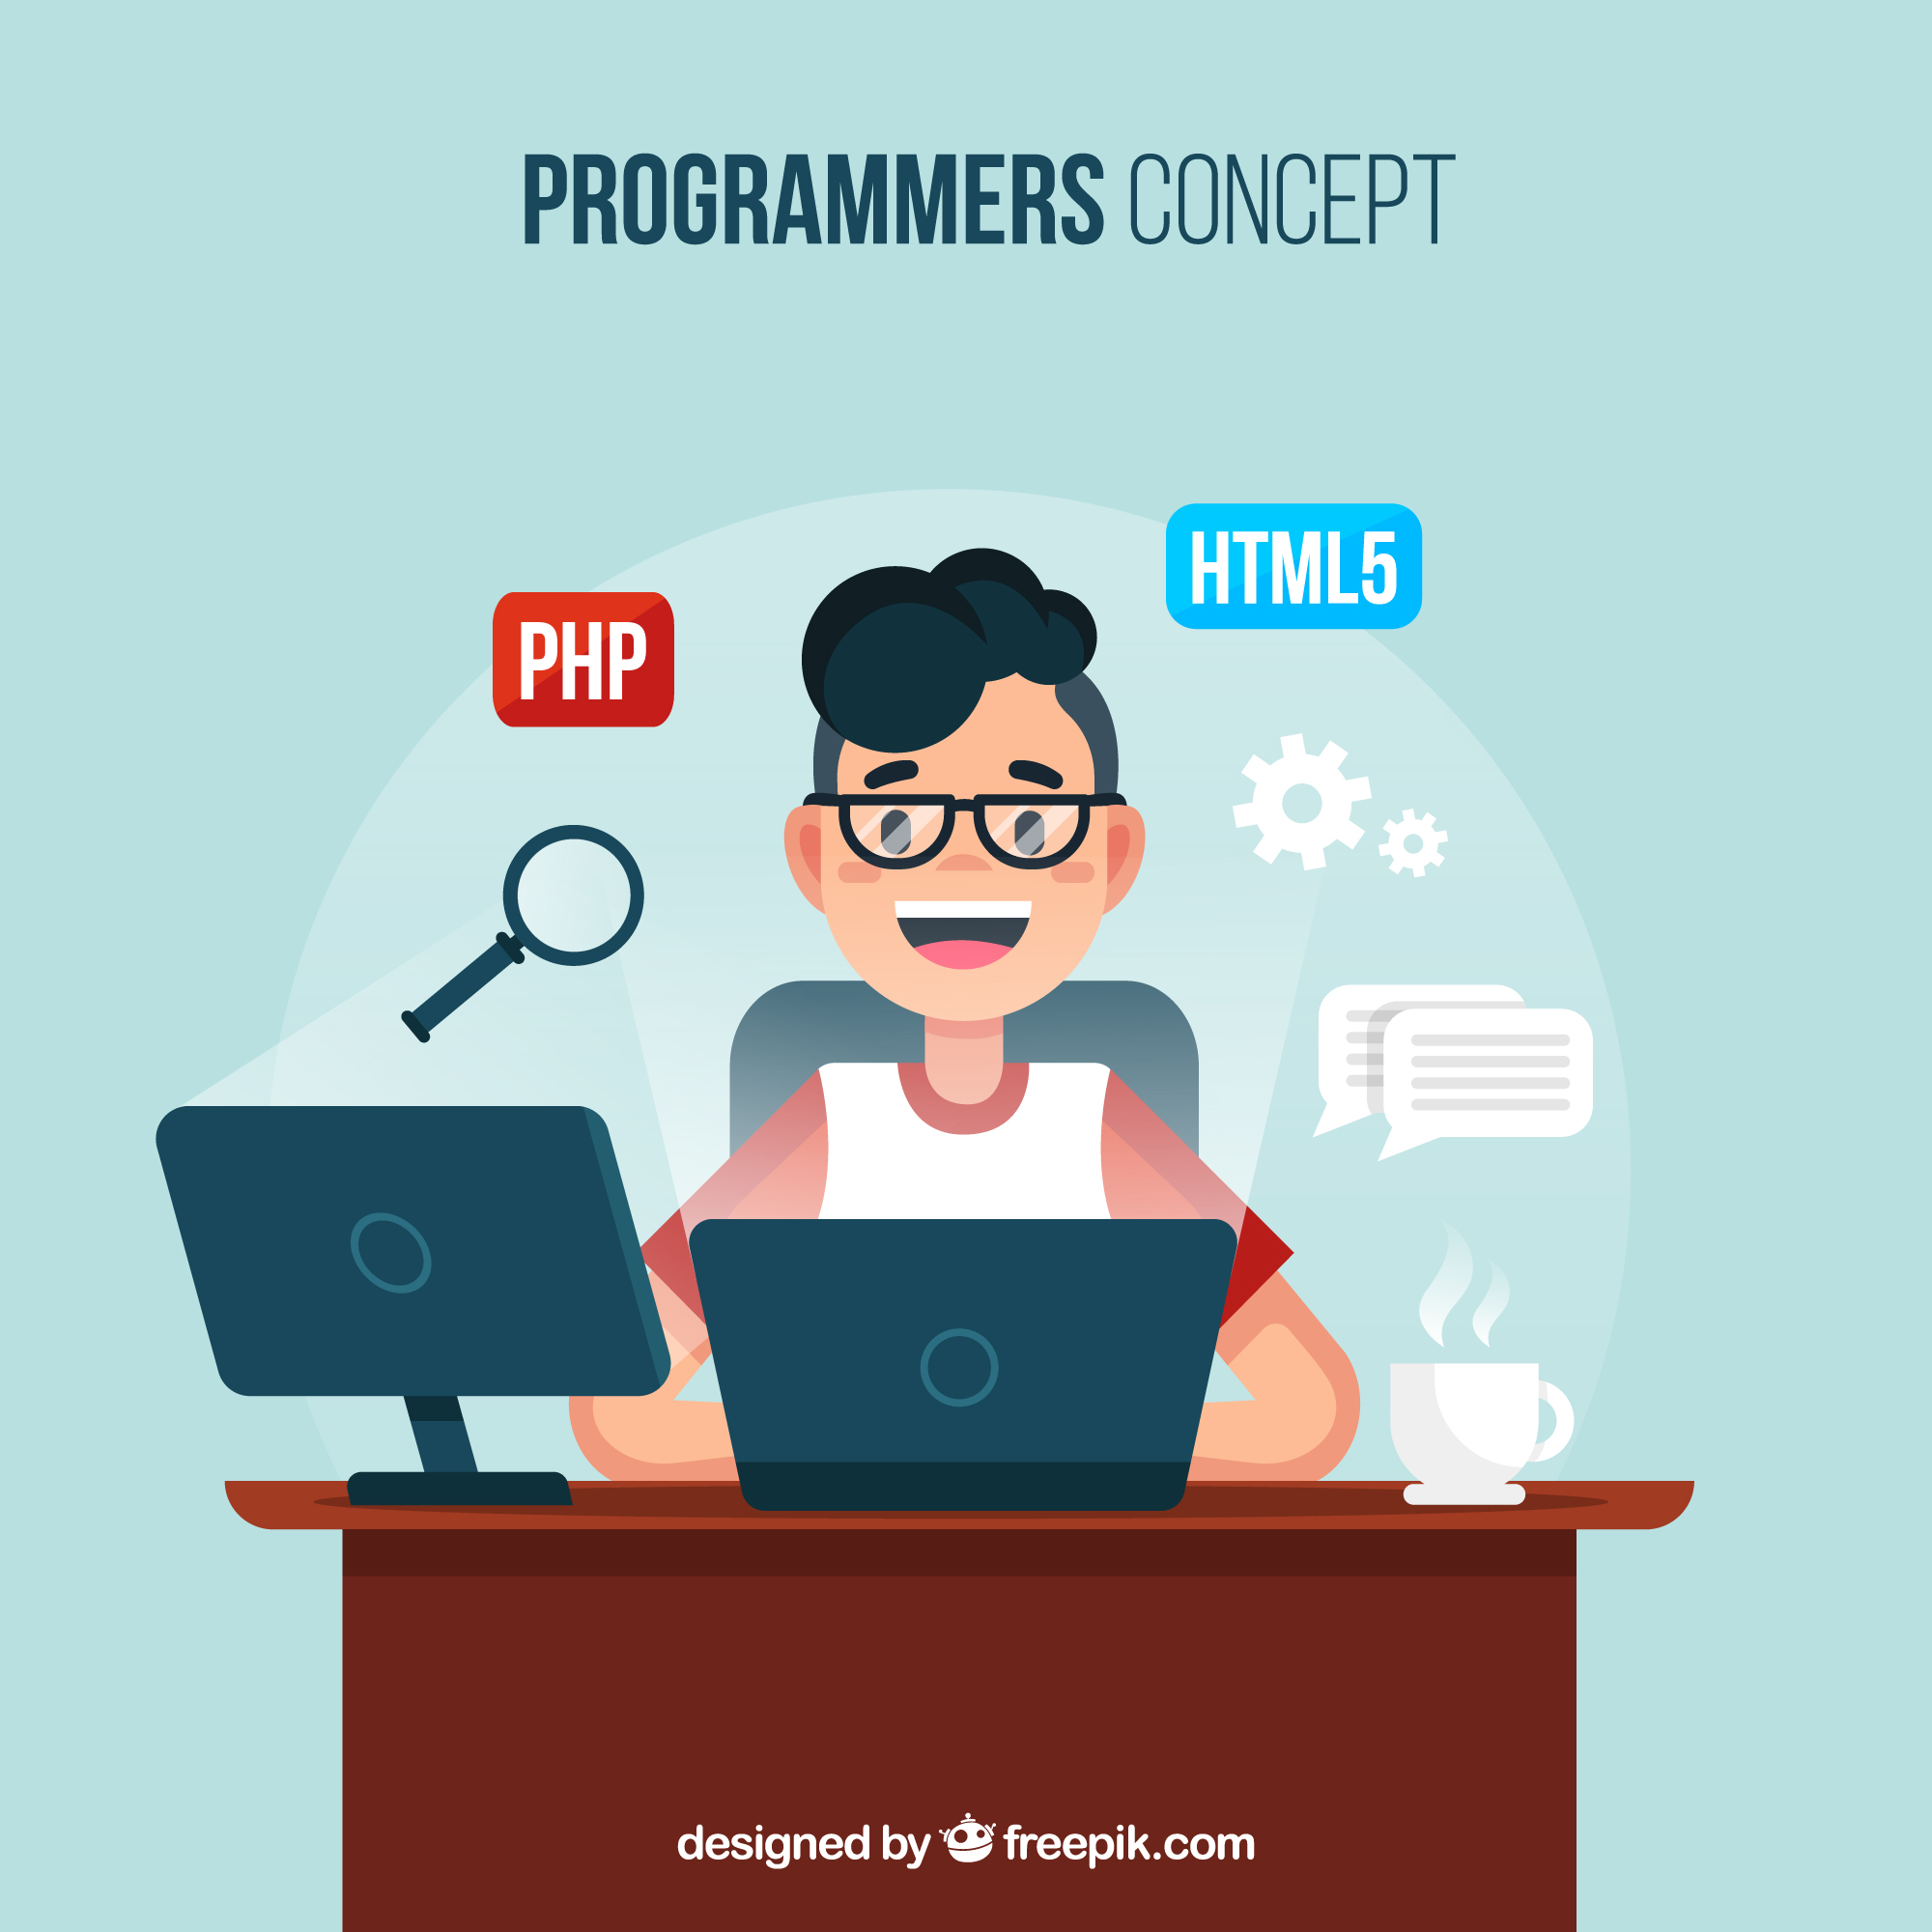 why php is used in web development?